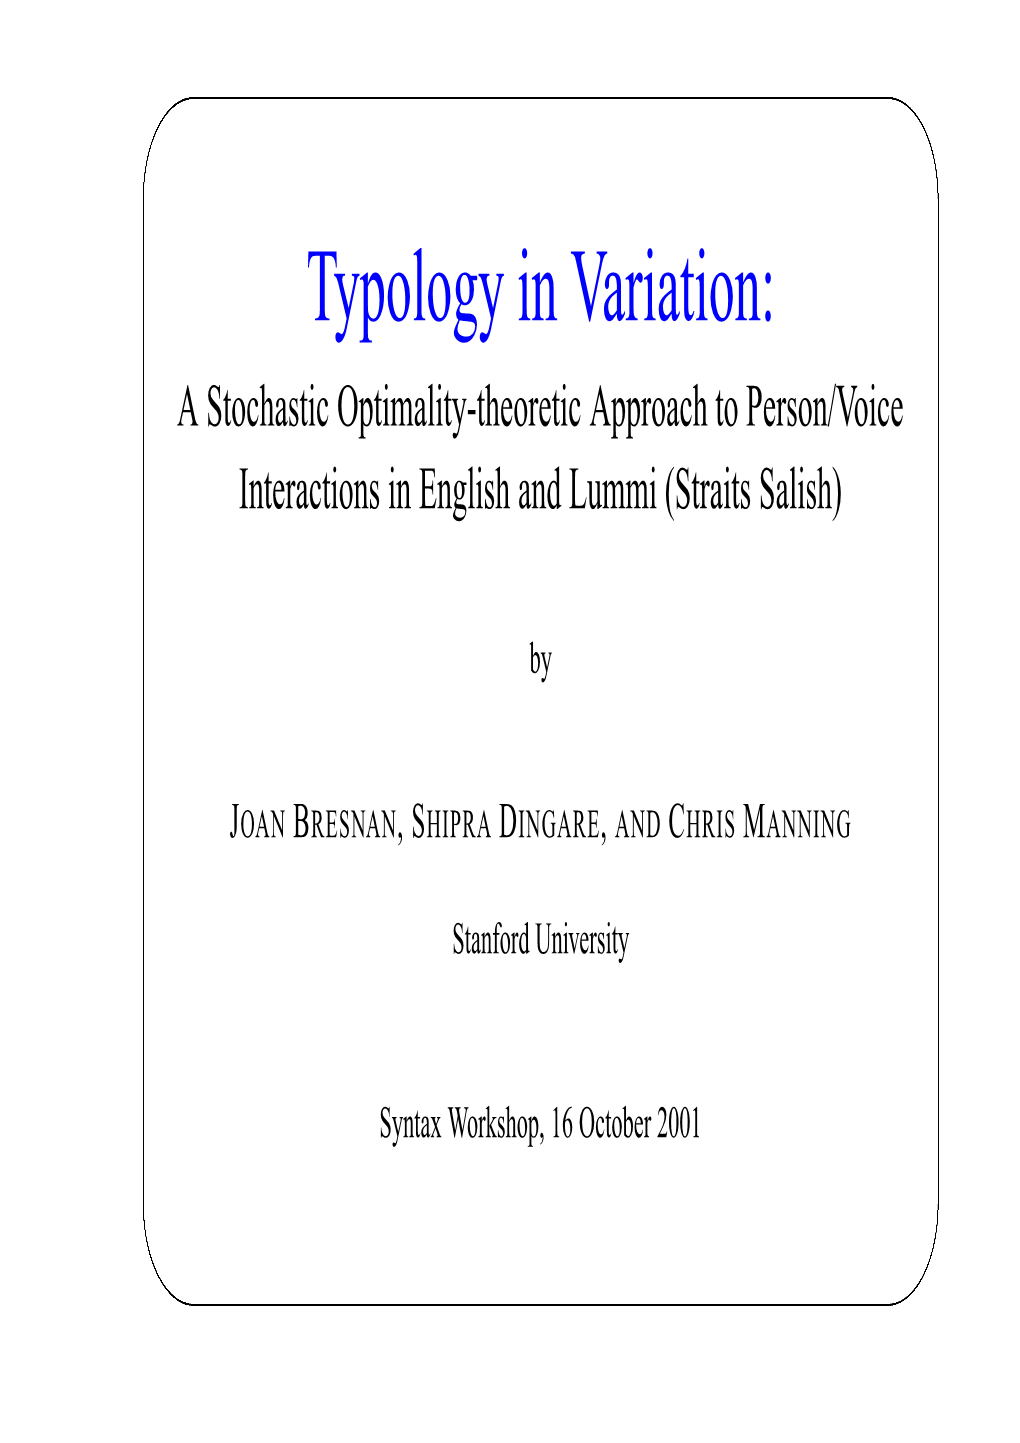 Typology in Variation: a Stochastic Optimality-Theoretic Approach to Person/Voice Interactions in English and Lummi (Straits Salish)